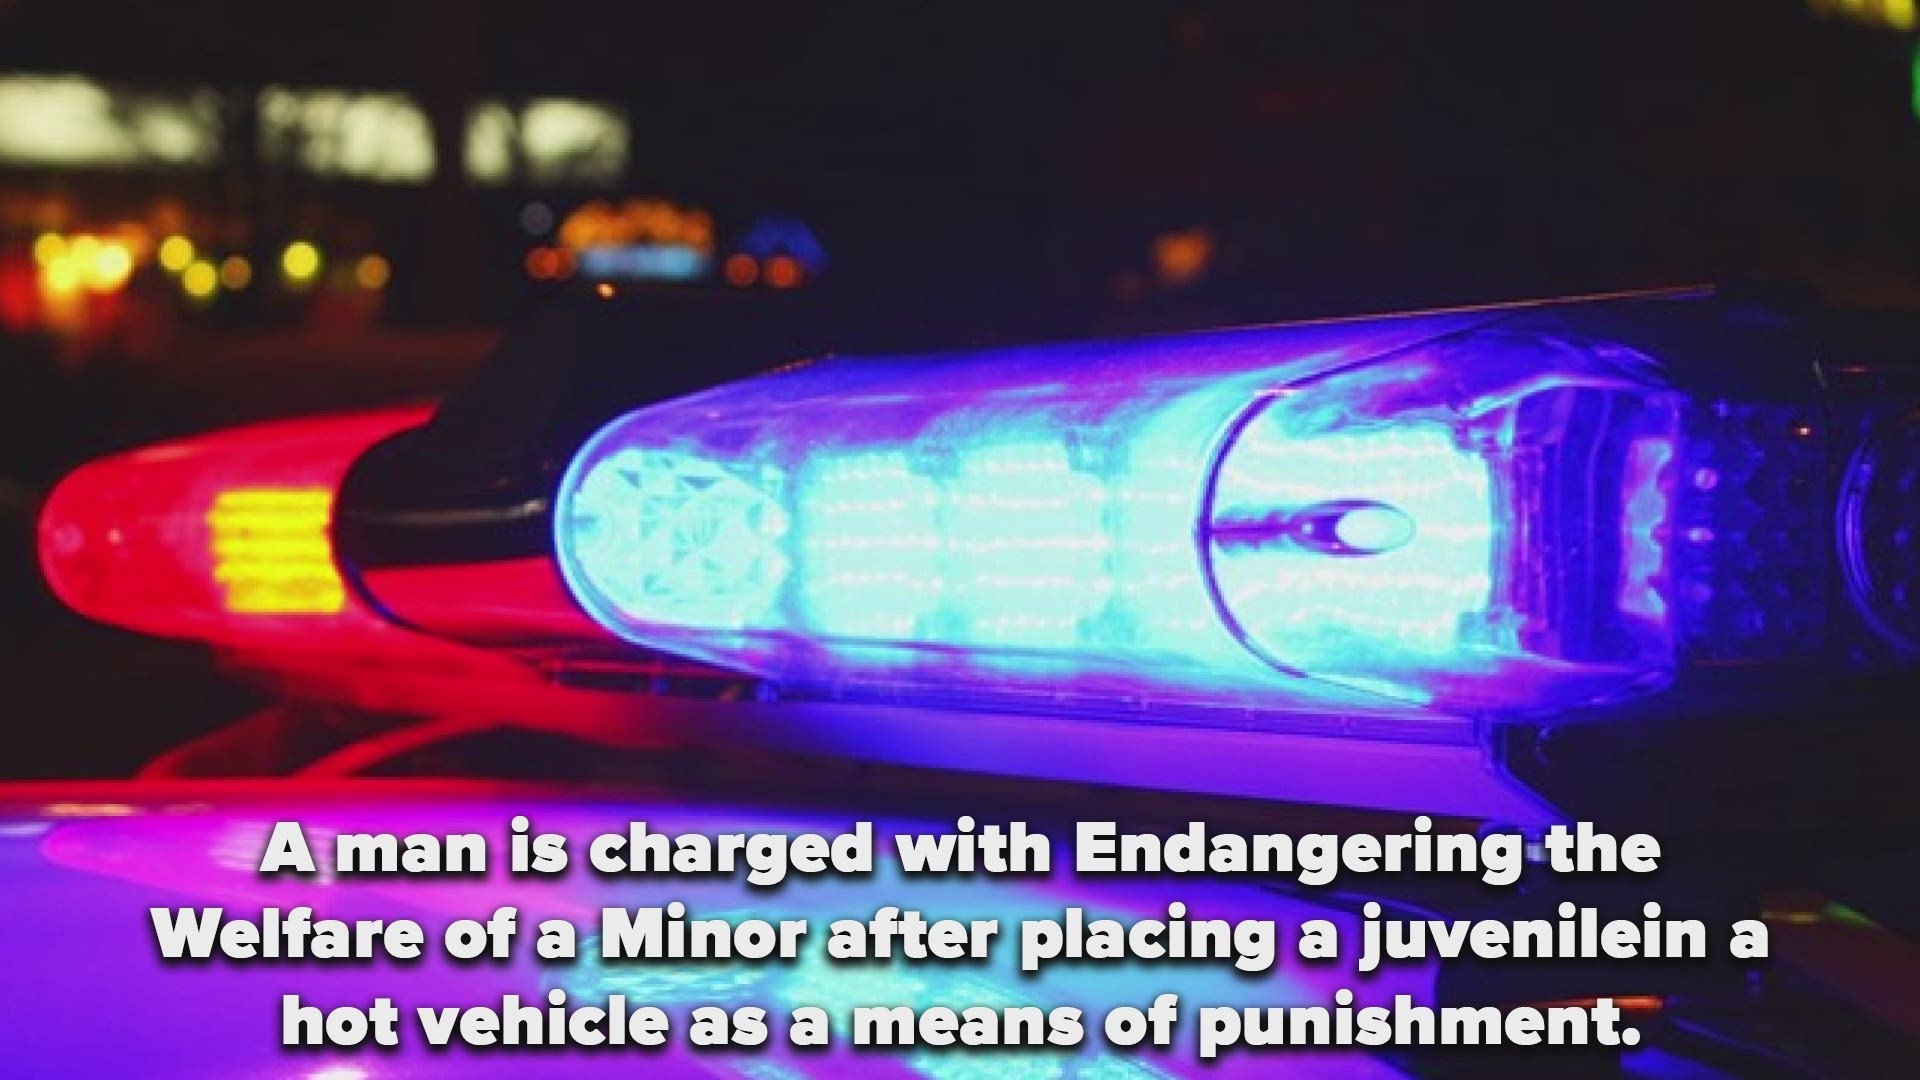 According to LRPD, a man has been charge with Endangering the Welfare of a Minor after placing a juvenile in a hot vehicle as a means of punishment.